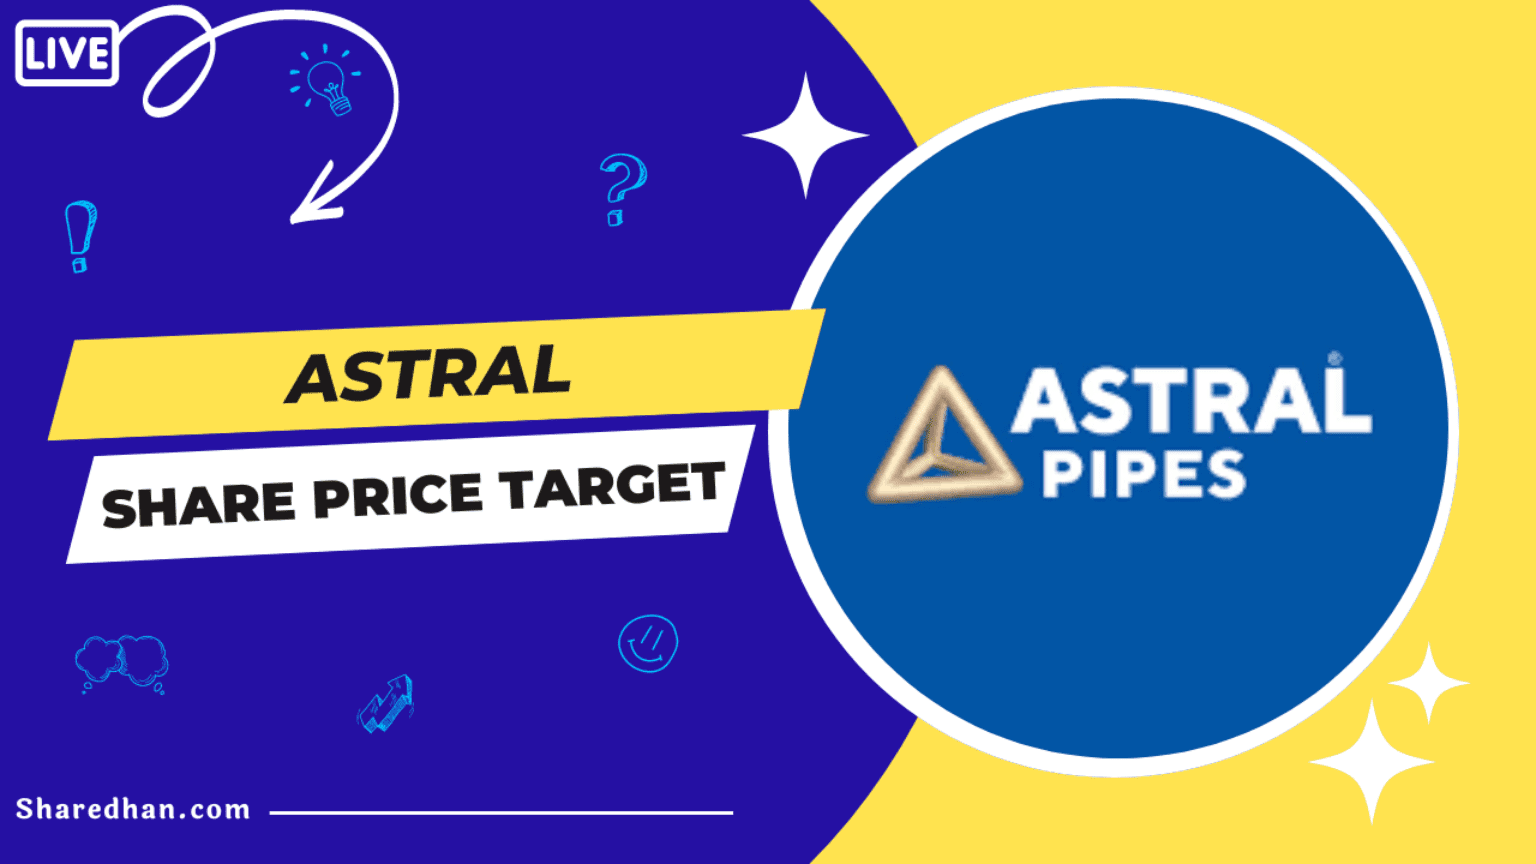 Astral Share Price Target 2023 2025 2027 2030 To 2050 Sharedhan 9239